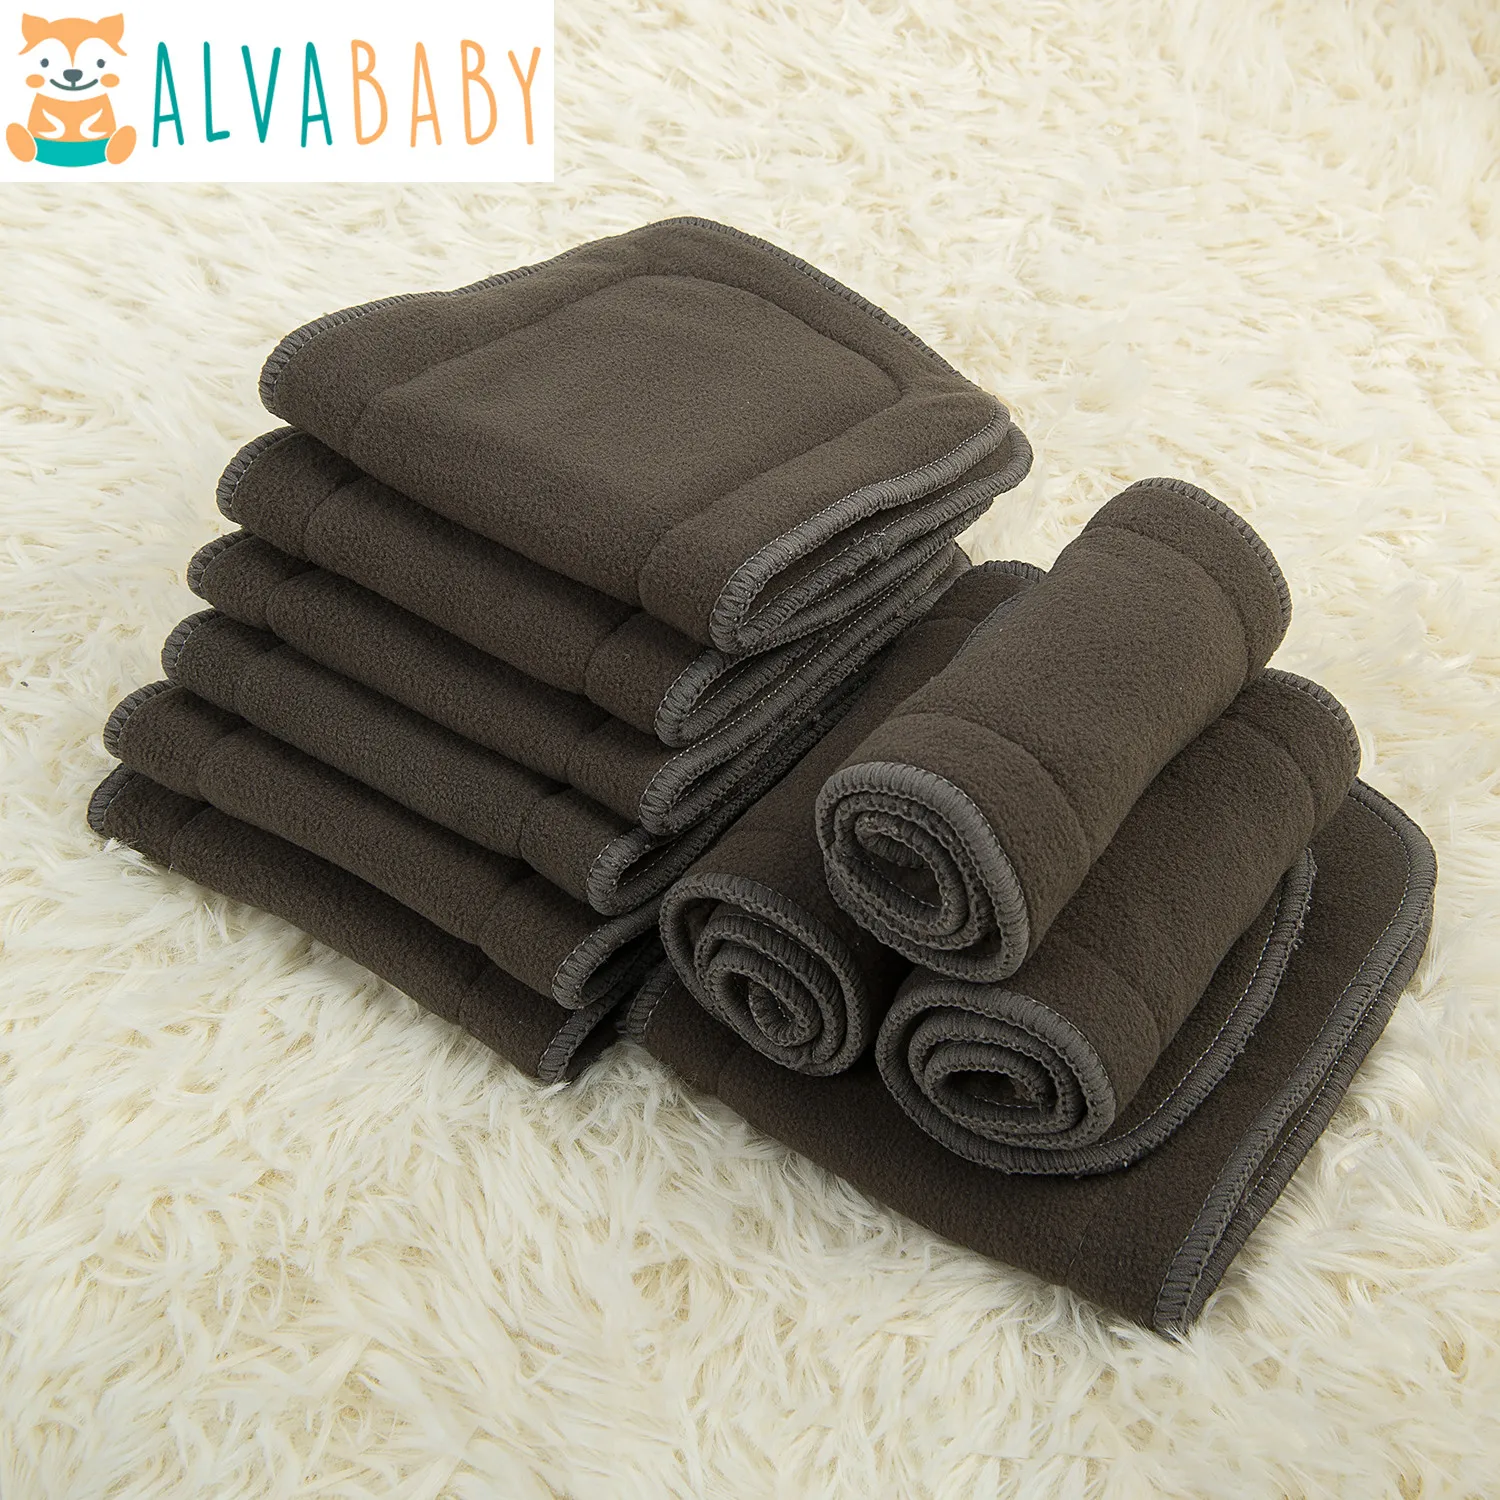 (10pcs per Set) ALVABABY 5 Layers Bamboo Charcoal Insert High Absorbent Reusable Baby Cloth Diaper Nappy Inserts